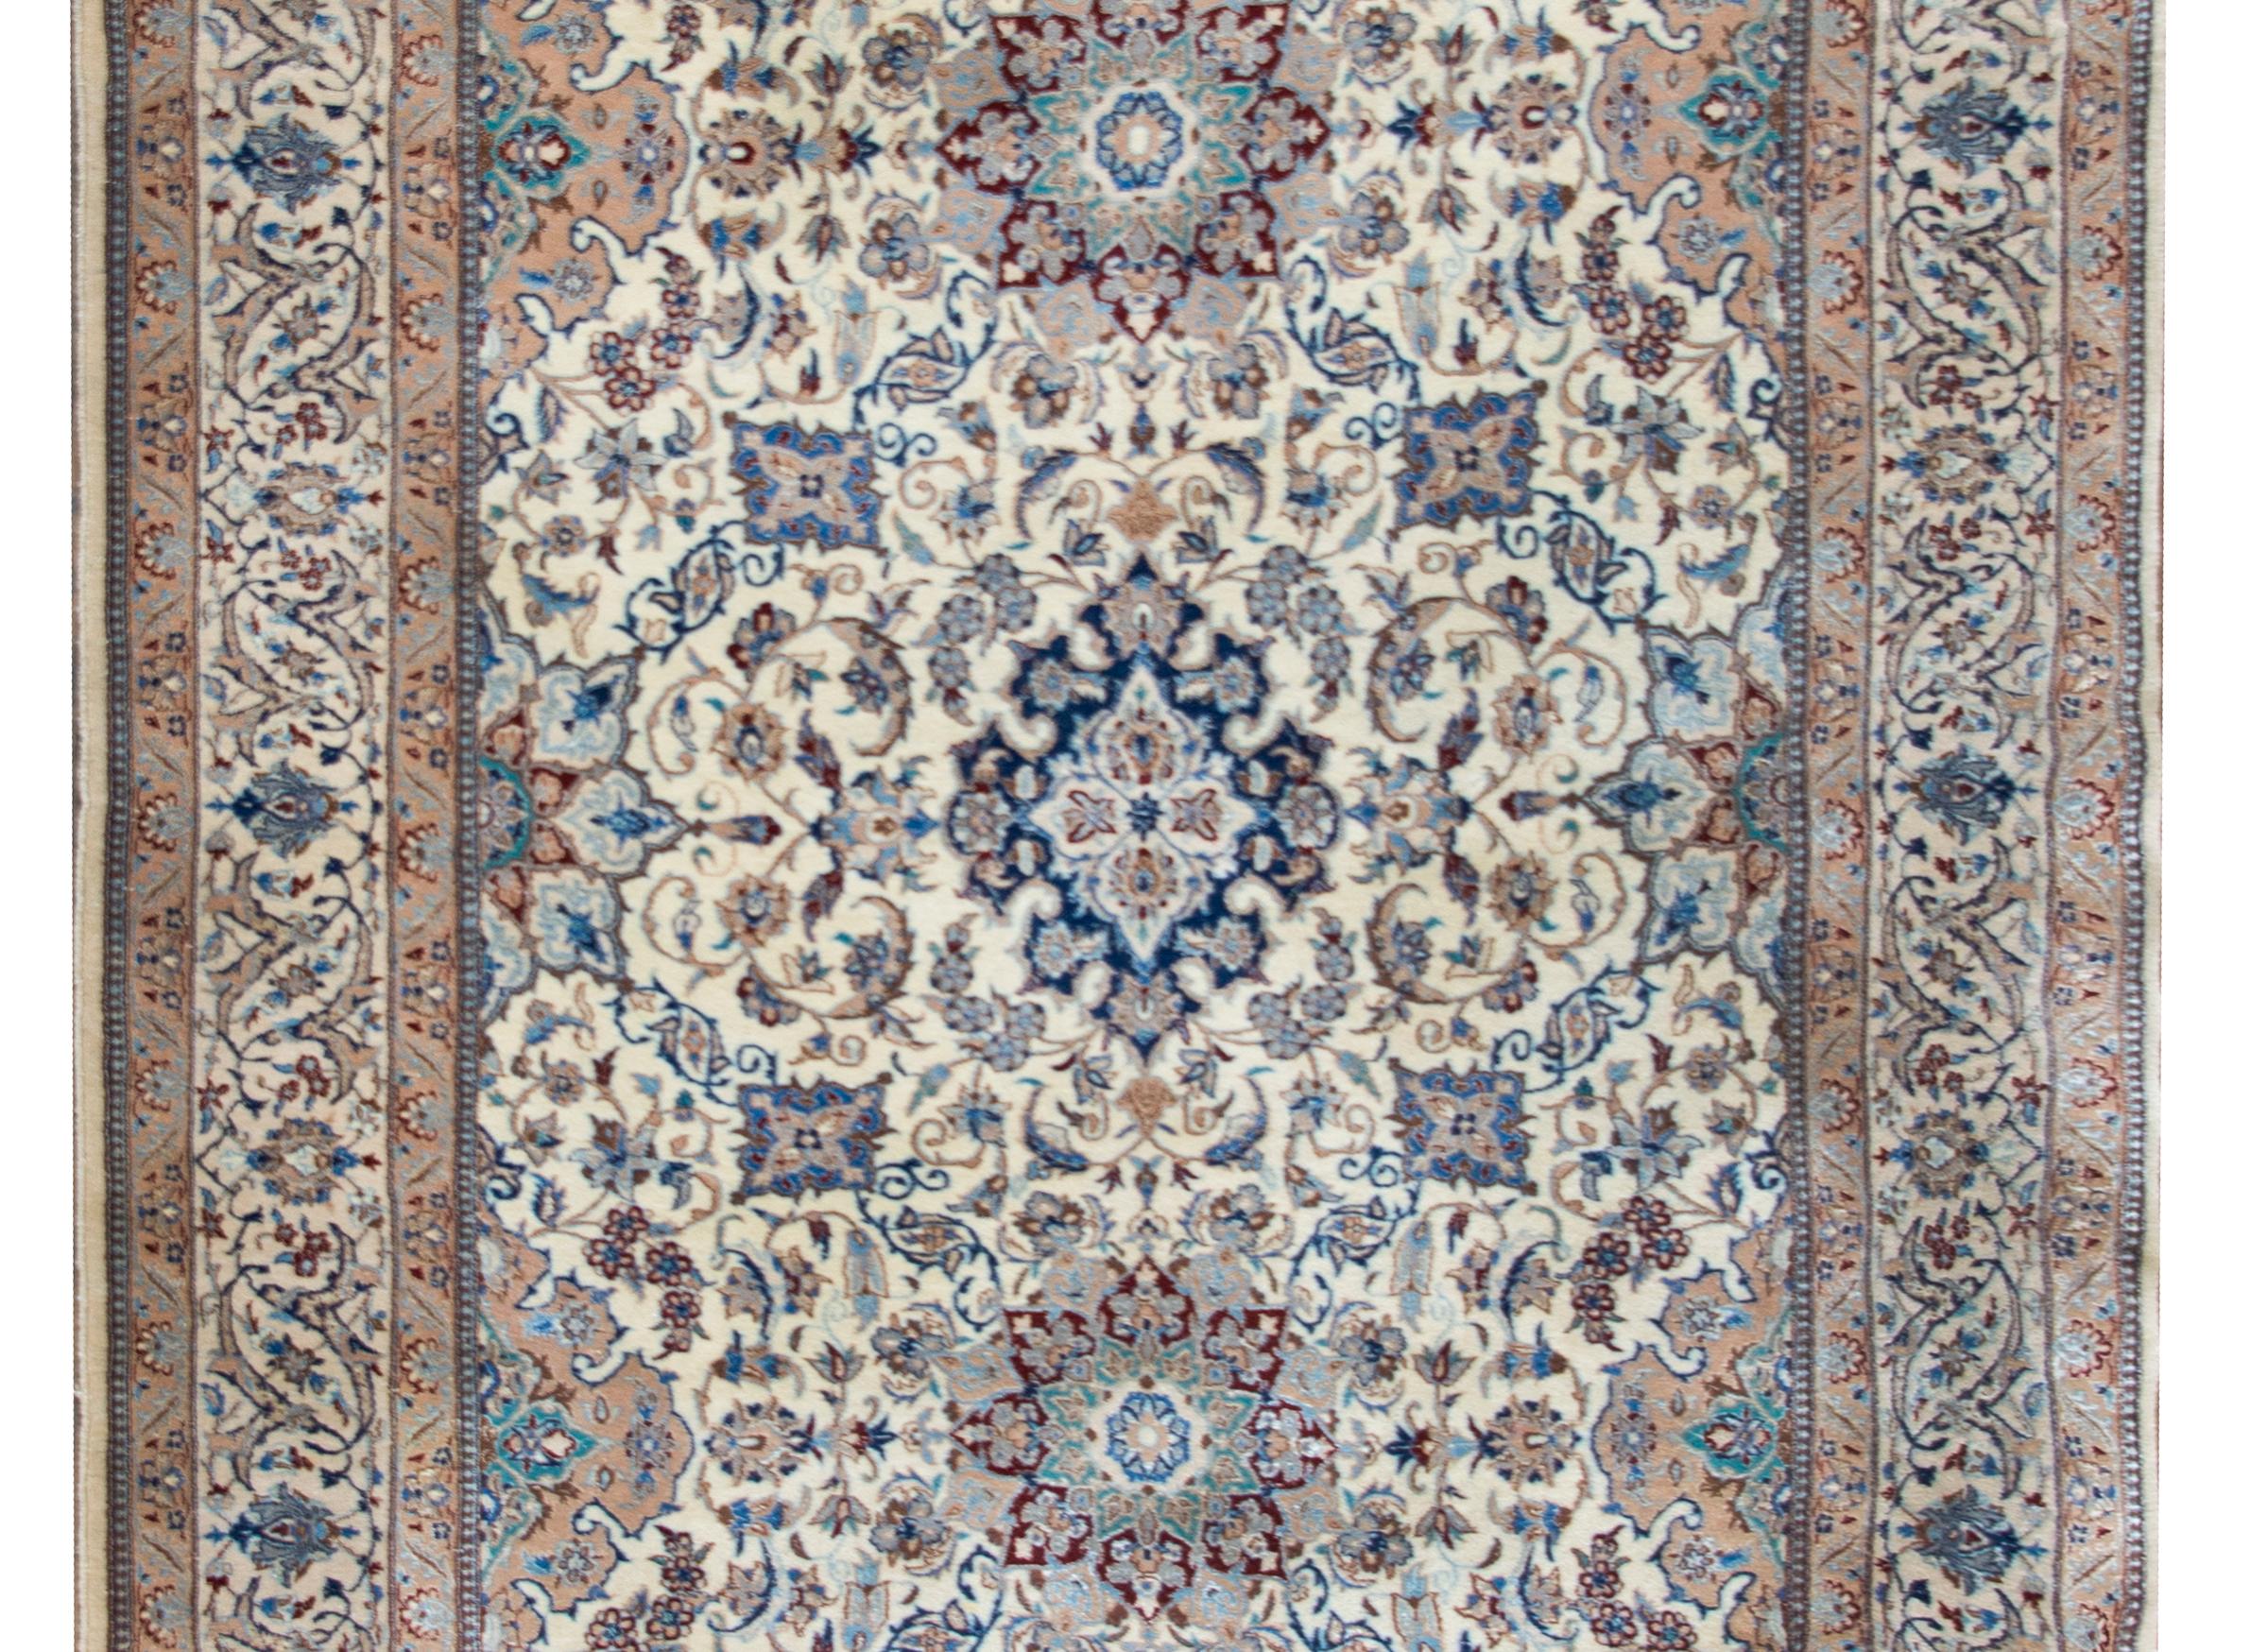 A wonderful late 20th century Persian Kashan rug with an elaborate all-over pattern woven with myriad large and small flowers, and scrolling vines, surrounded by a complex border with a wide central stripe with repeated large-scale flowers flanked